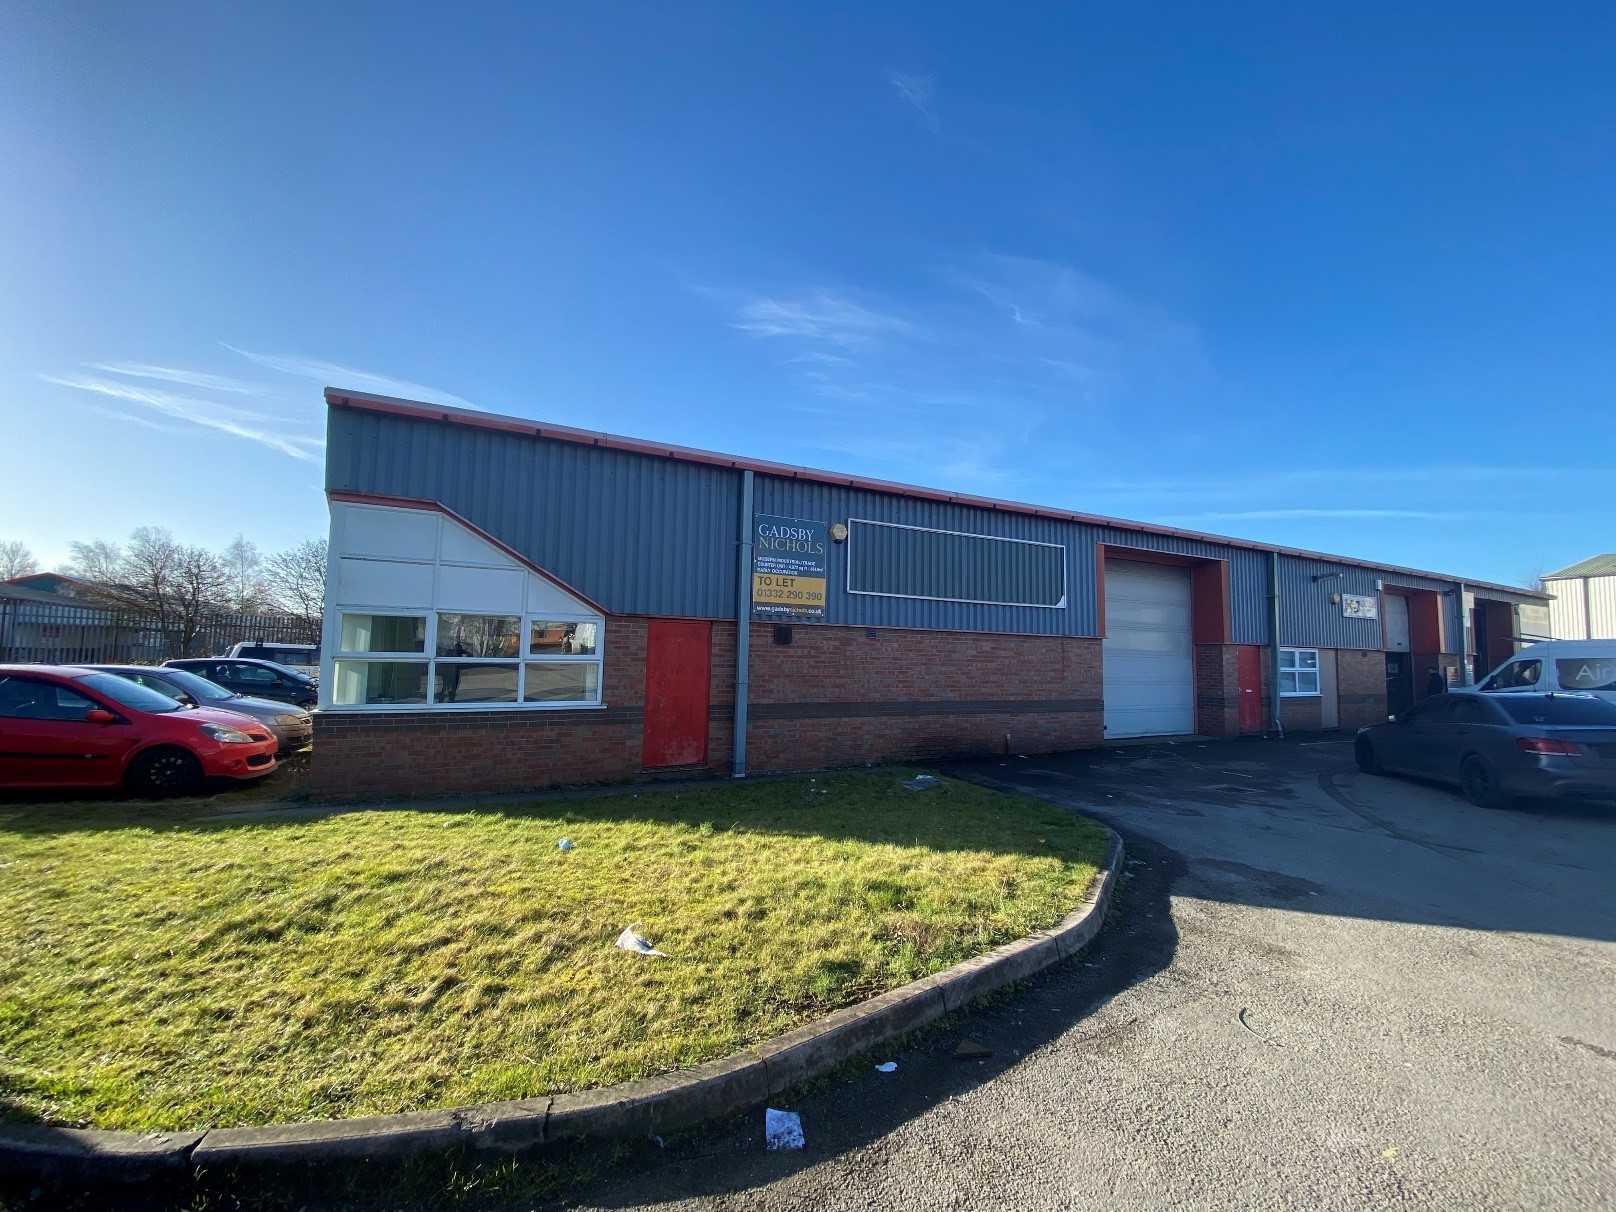 0 bed Distribution Warehouse for rent in Ilkeston. From Gadsby Nichols - Derby